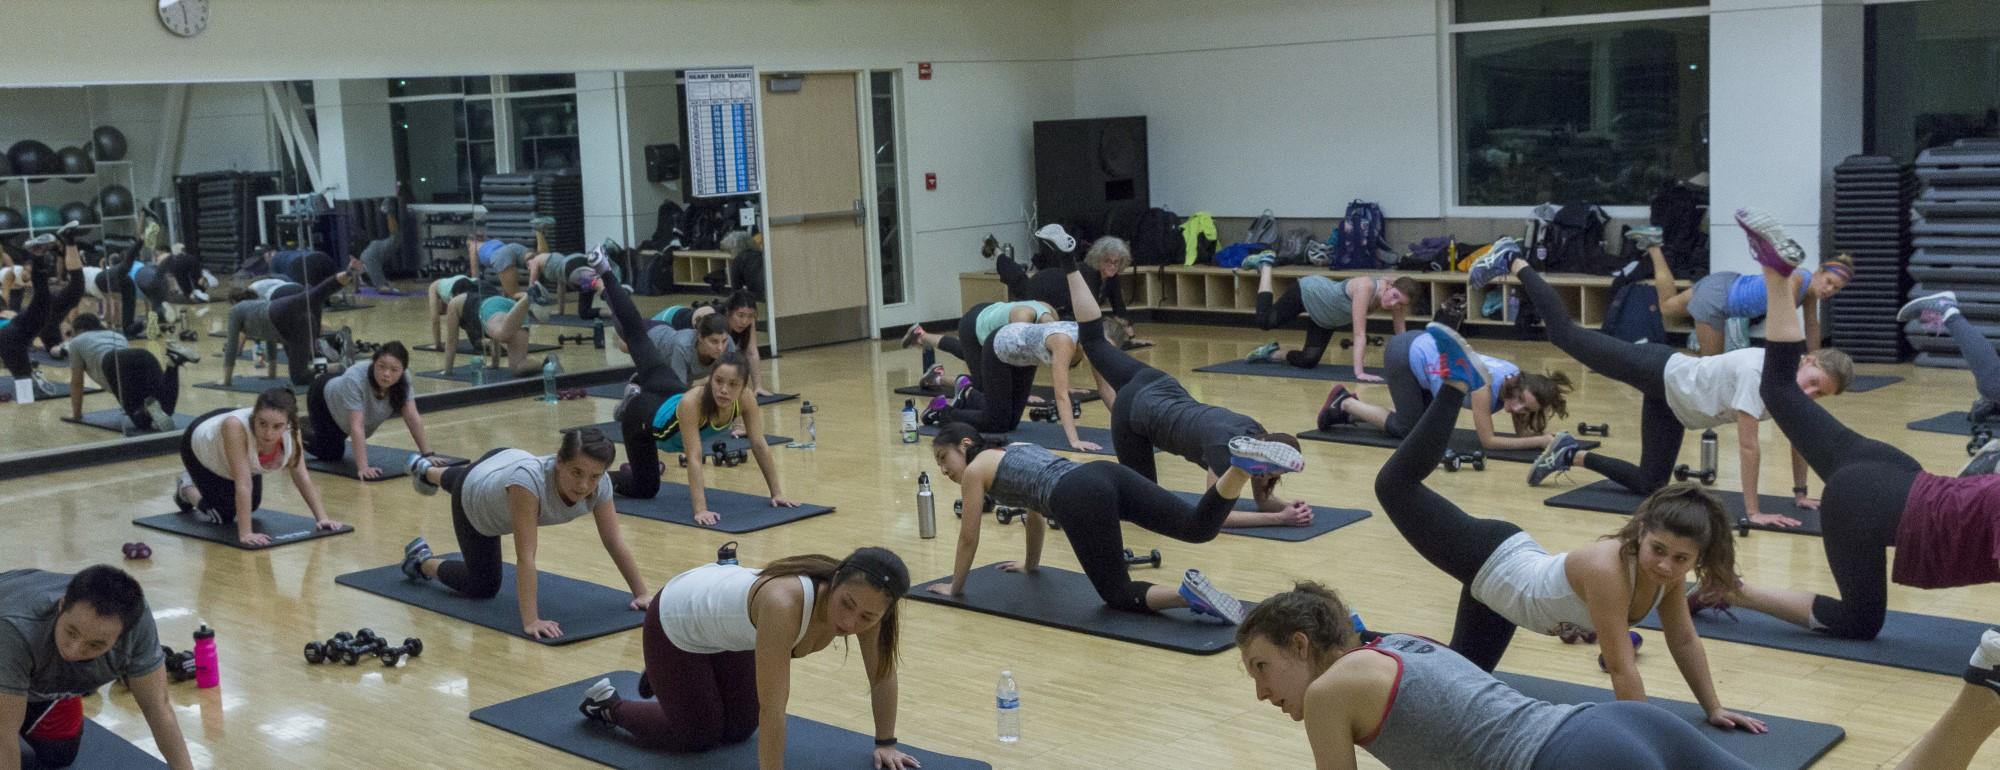 Students participating in a group exercise class in a studio at the ARC